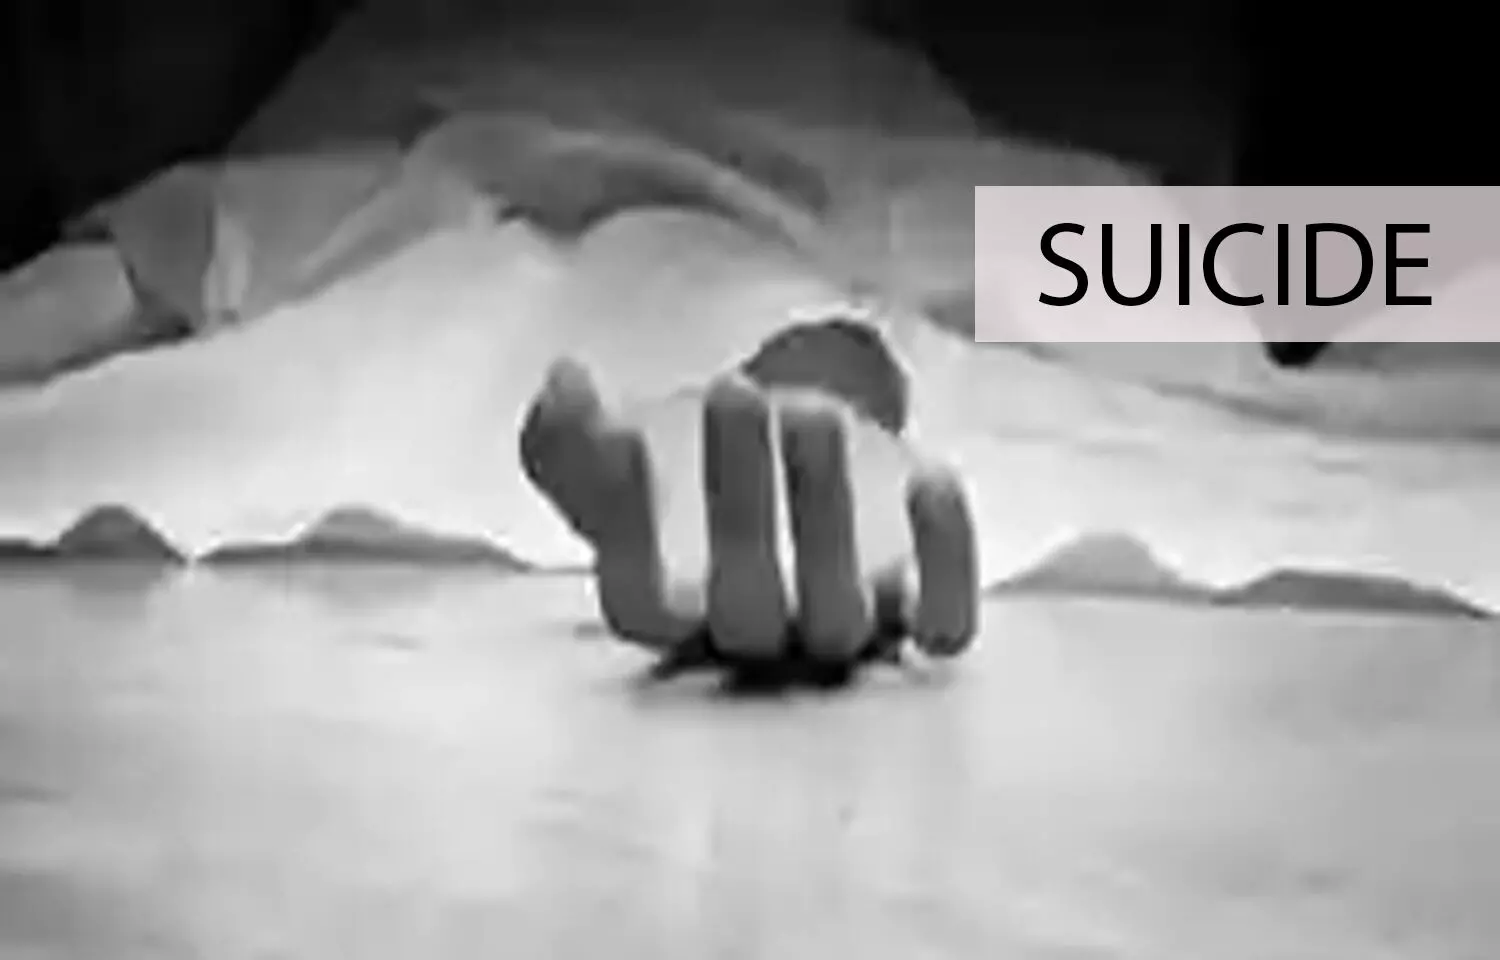 Ludhiana: Doctor commits suicide, two accused sentenced to 5 years jail for abetment